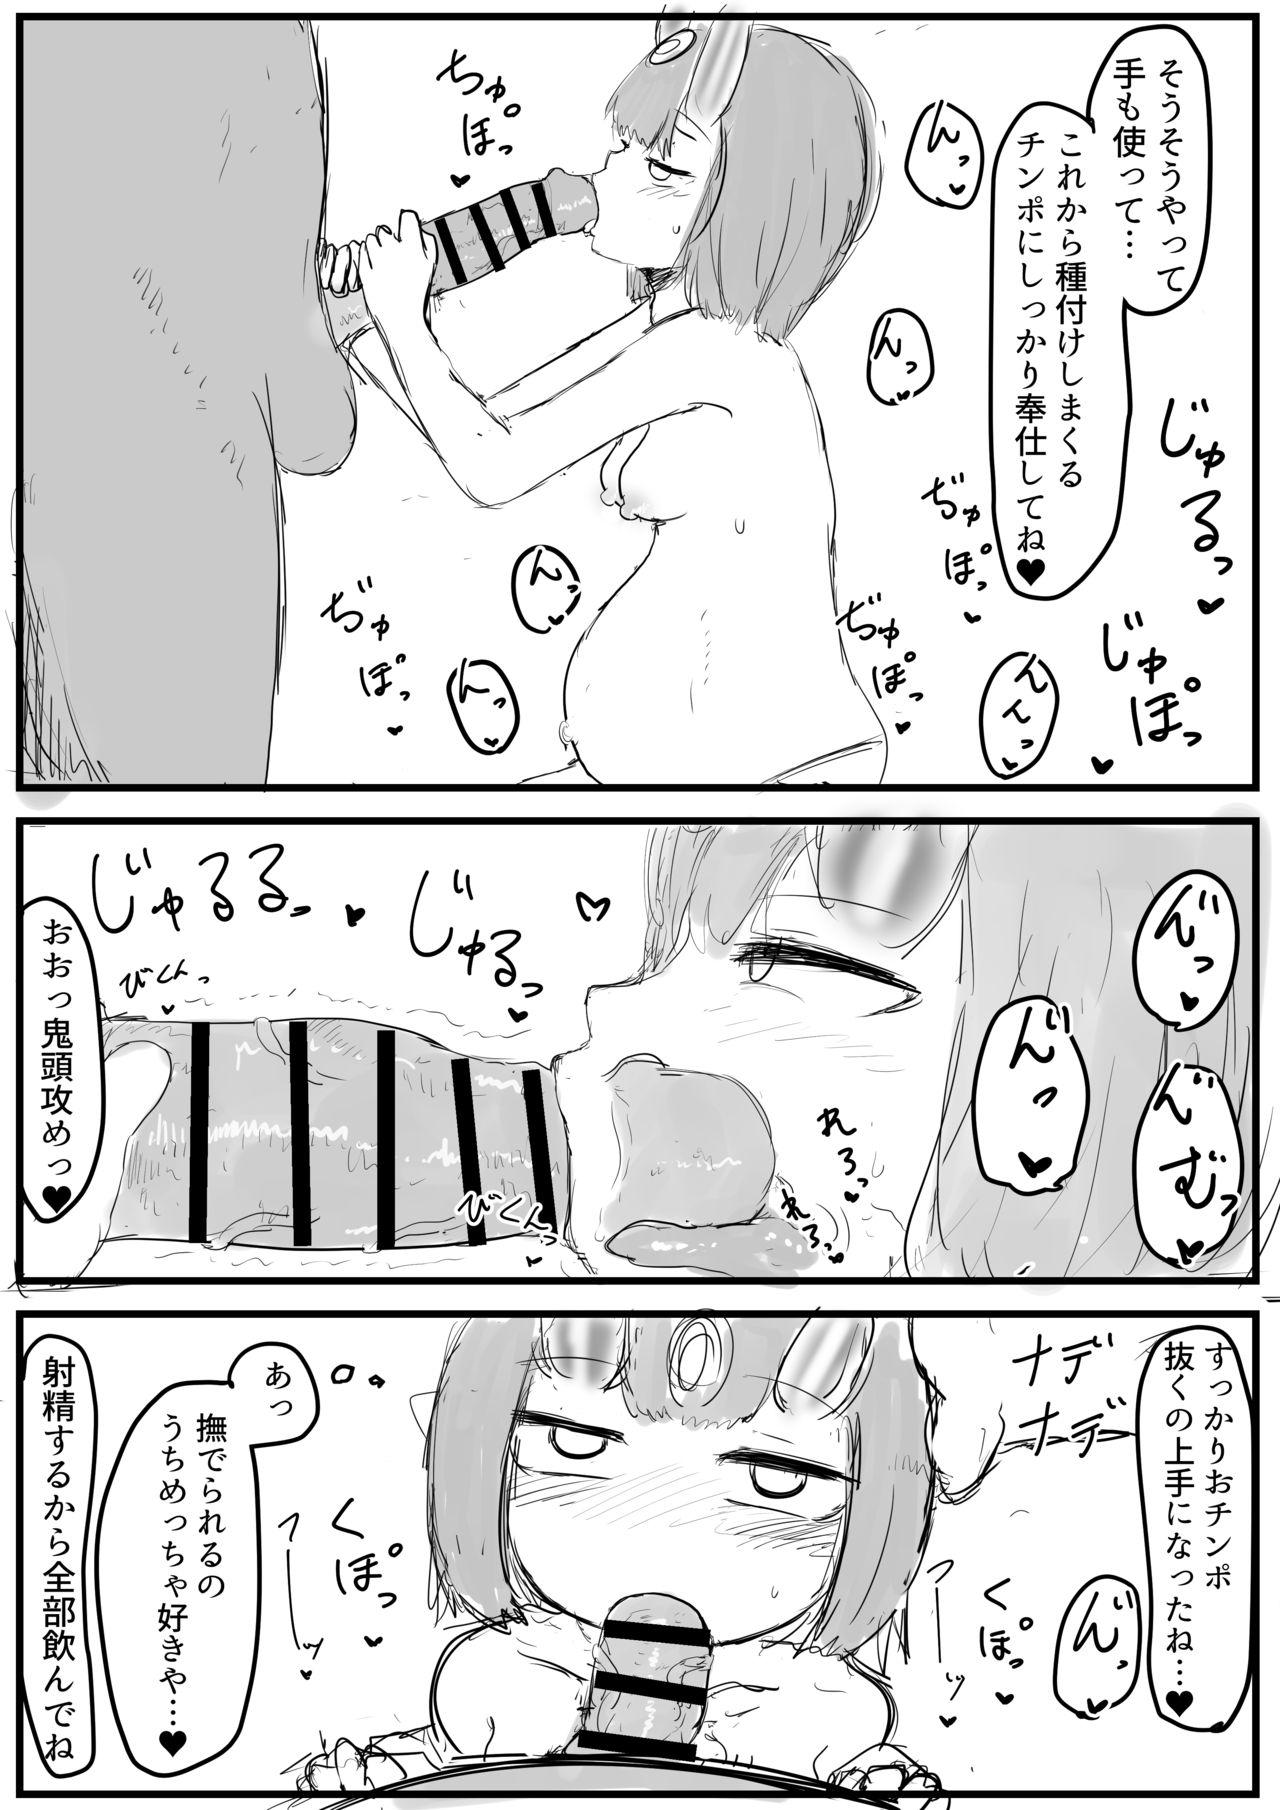 Suck ボテ腹酒吞童子ちゃんご出産 - Fate grand order Abg - Page 2